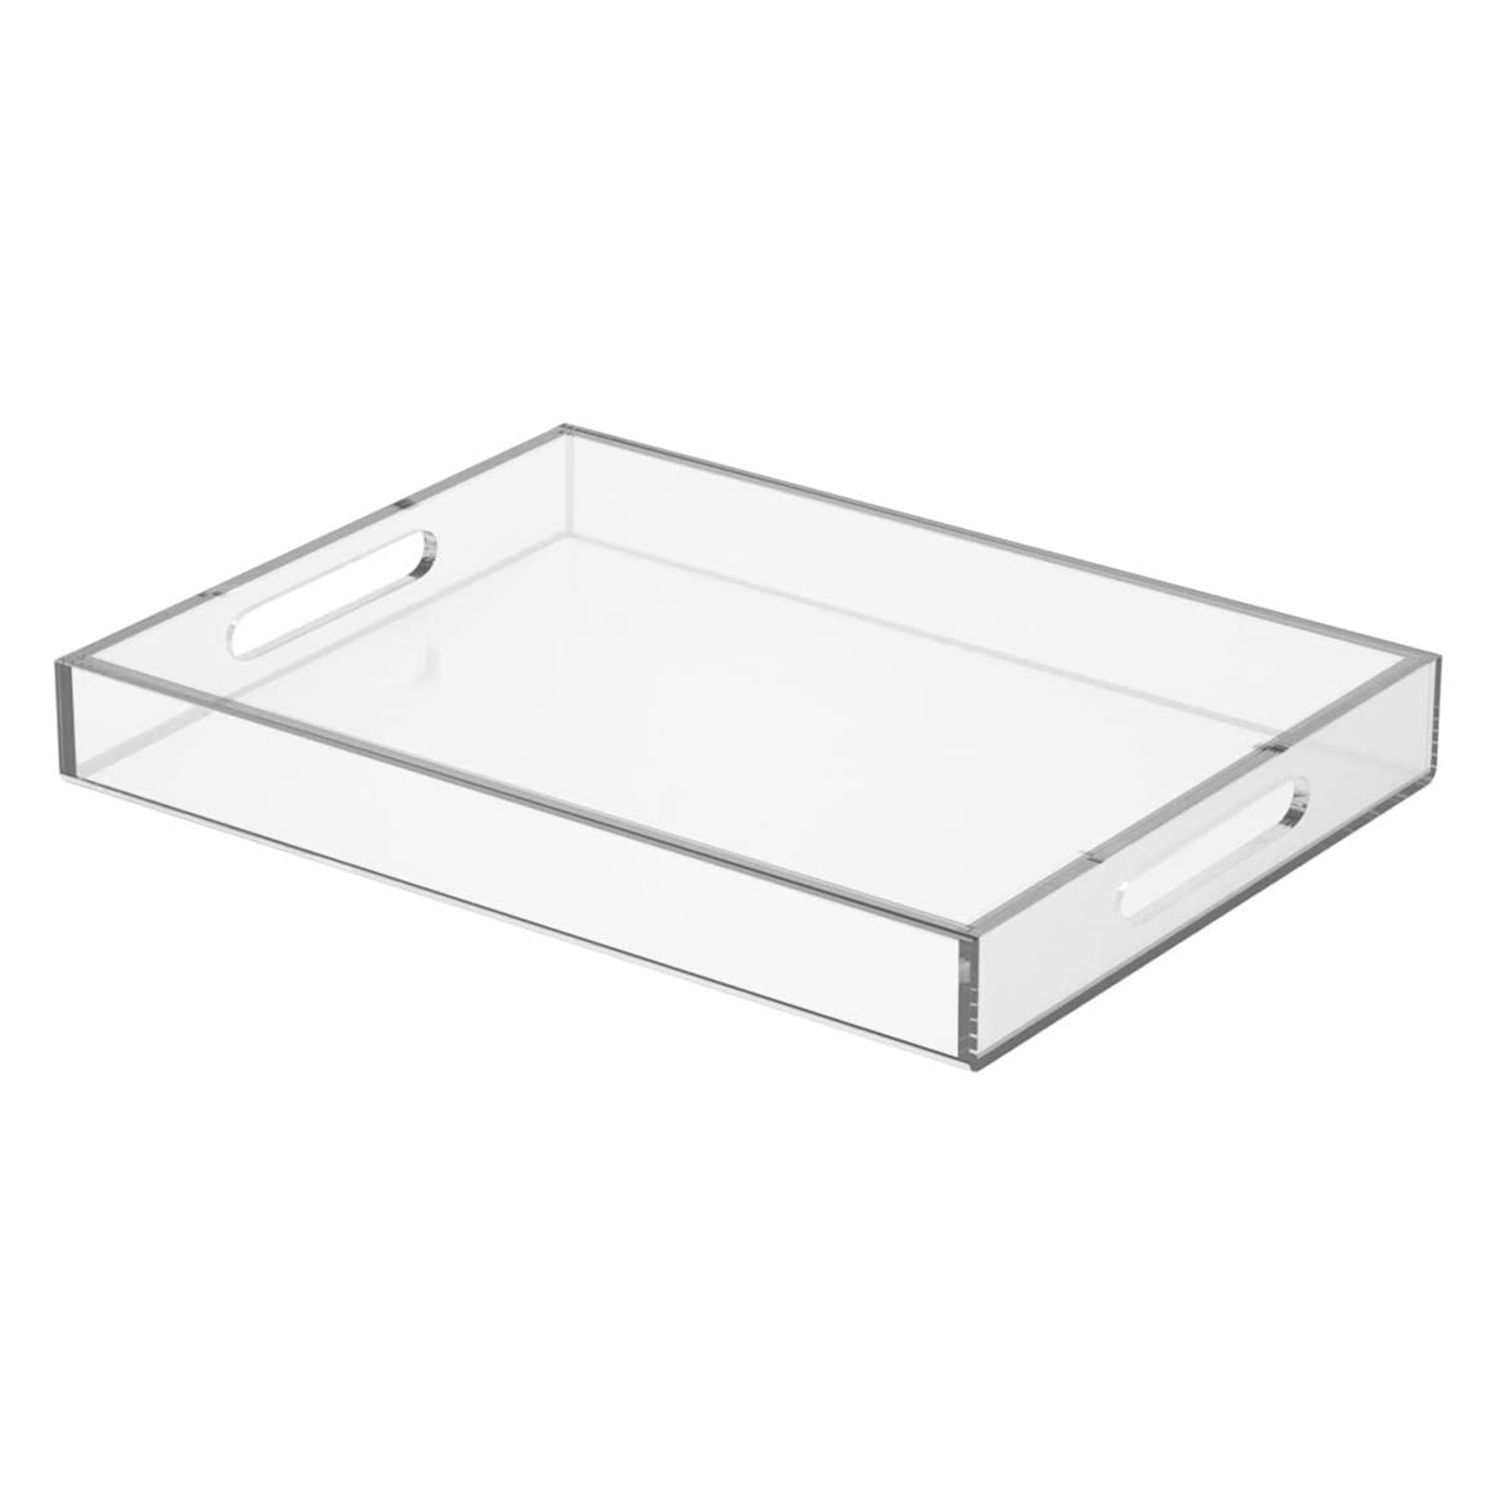 NIUBEE Clear Serving Tray